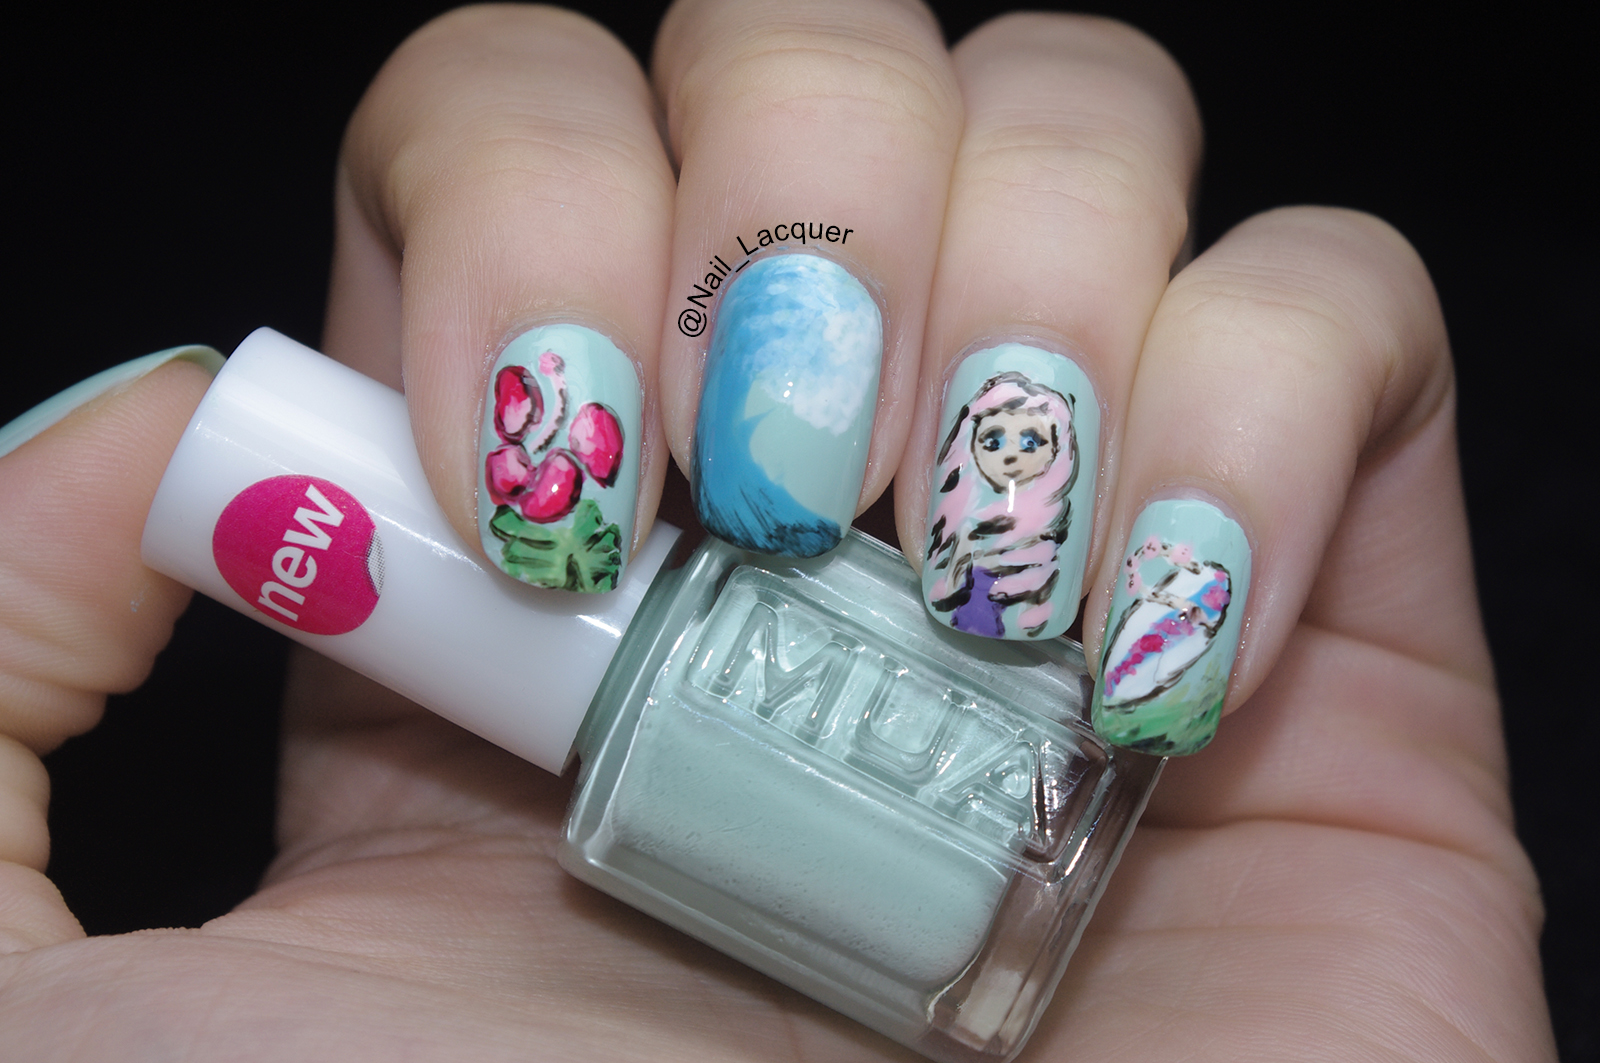 2. Tropical Themed Nail Art for Summer - wide 3